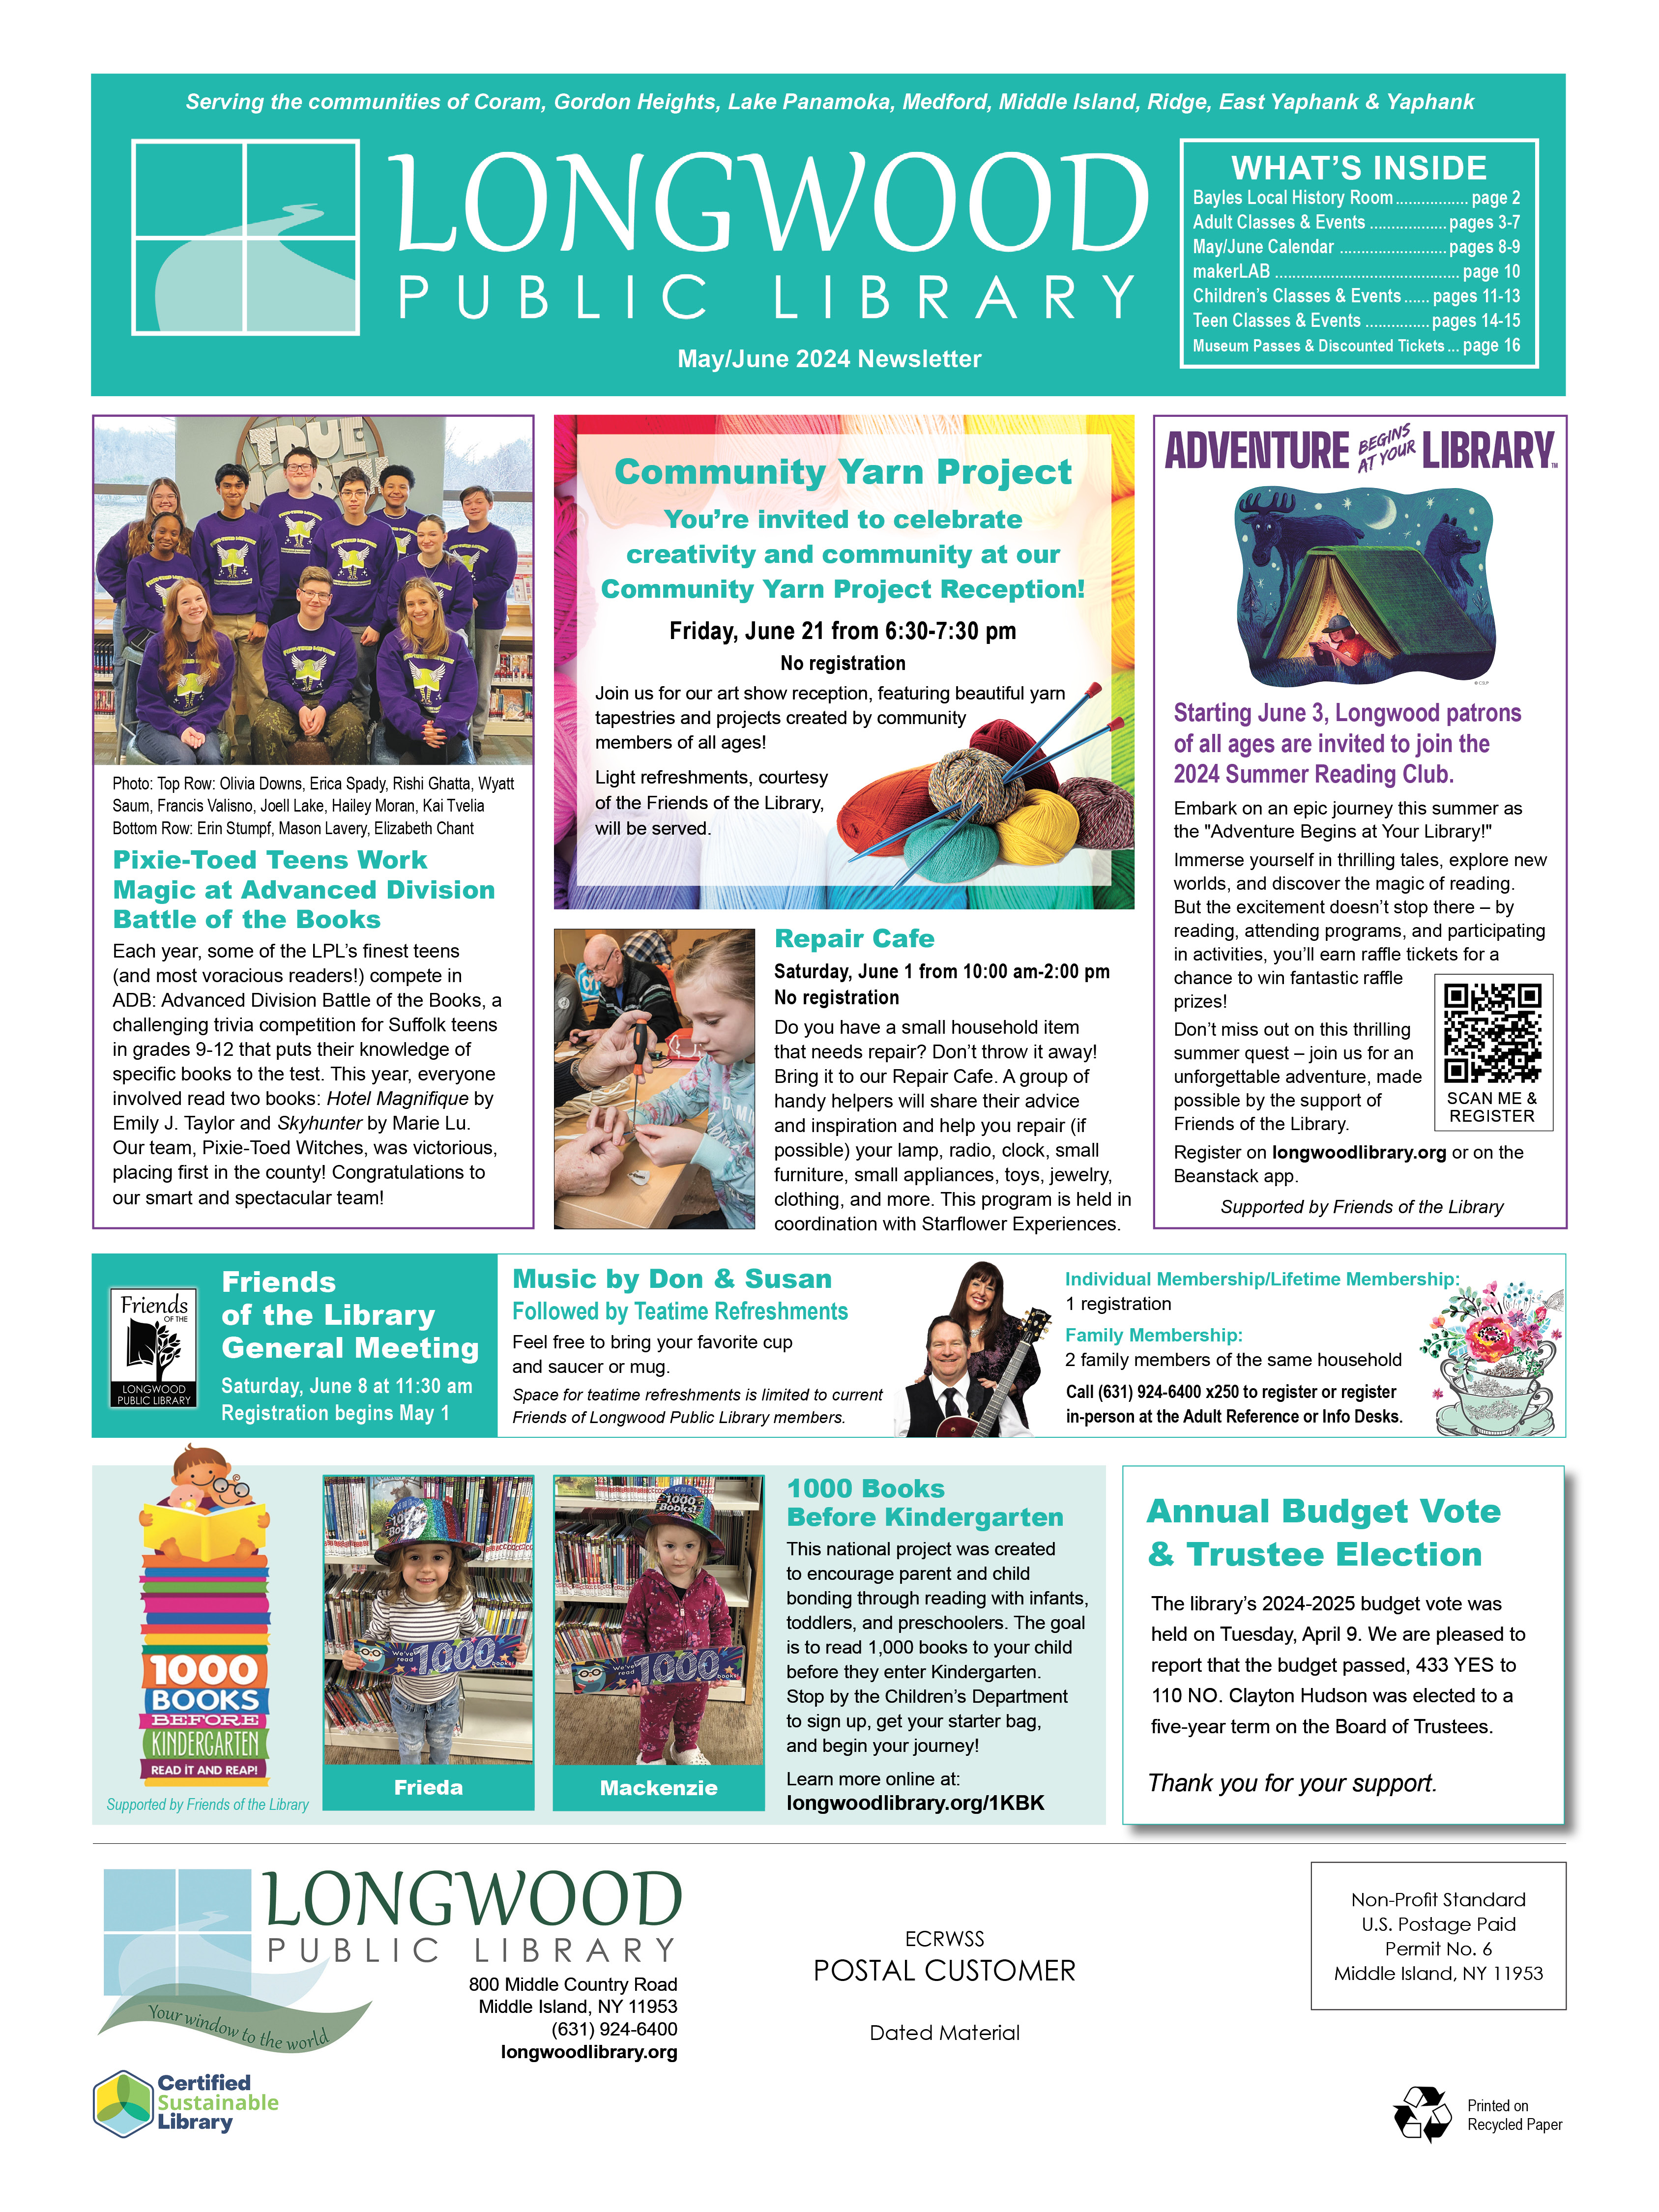 May/June Library Newsletter